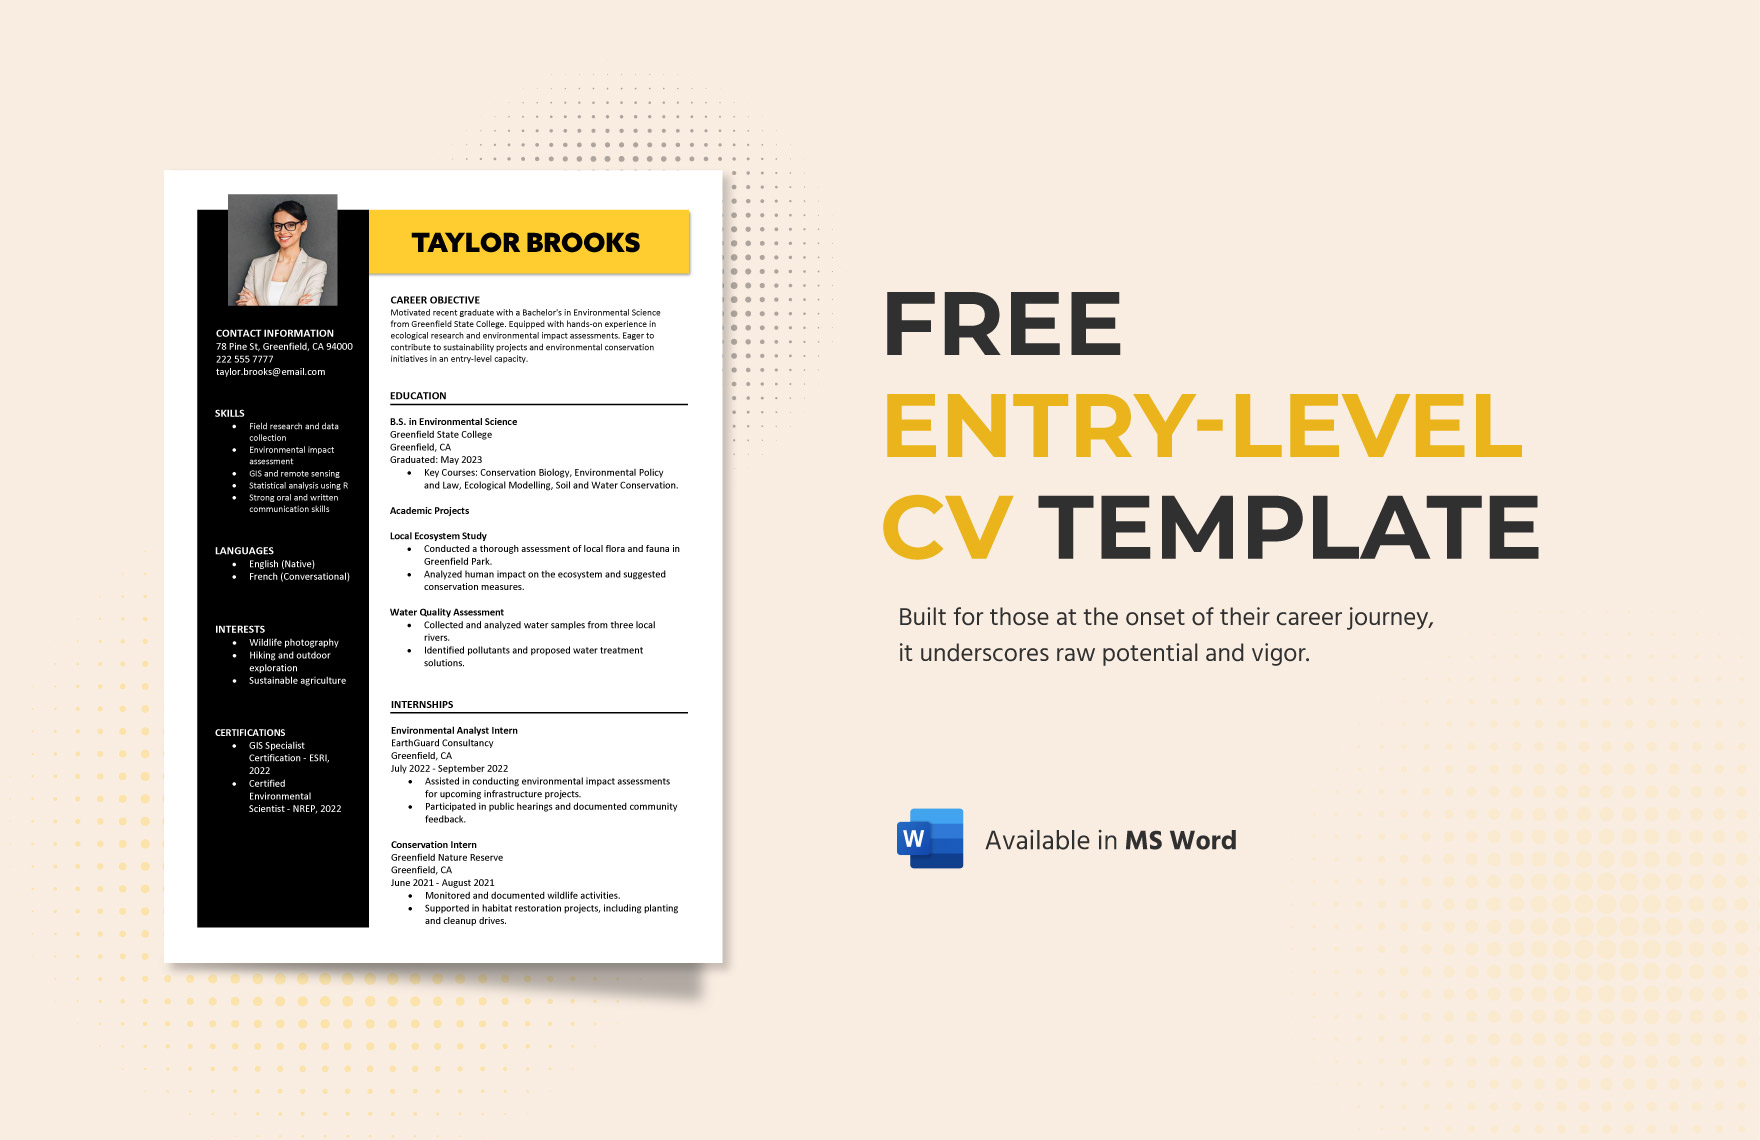 Free Entry-Level CV Template